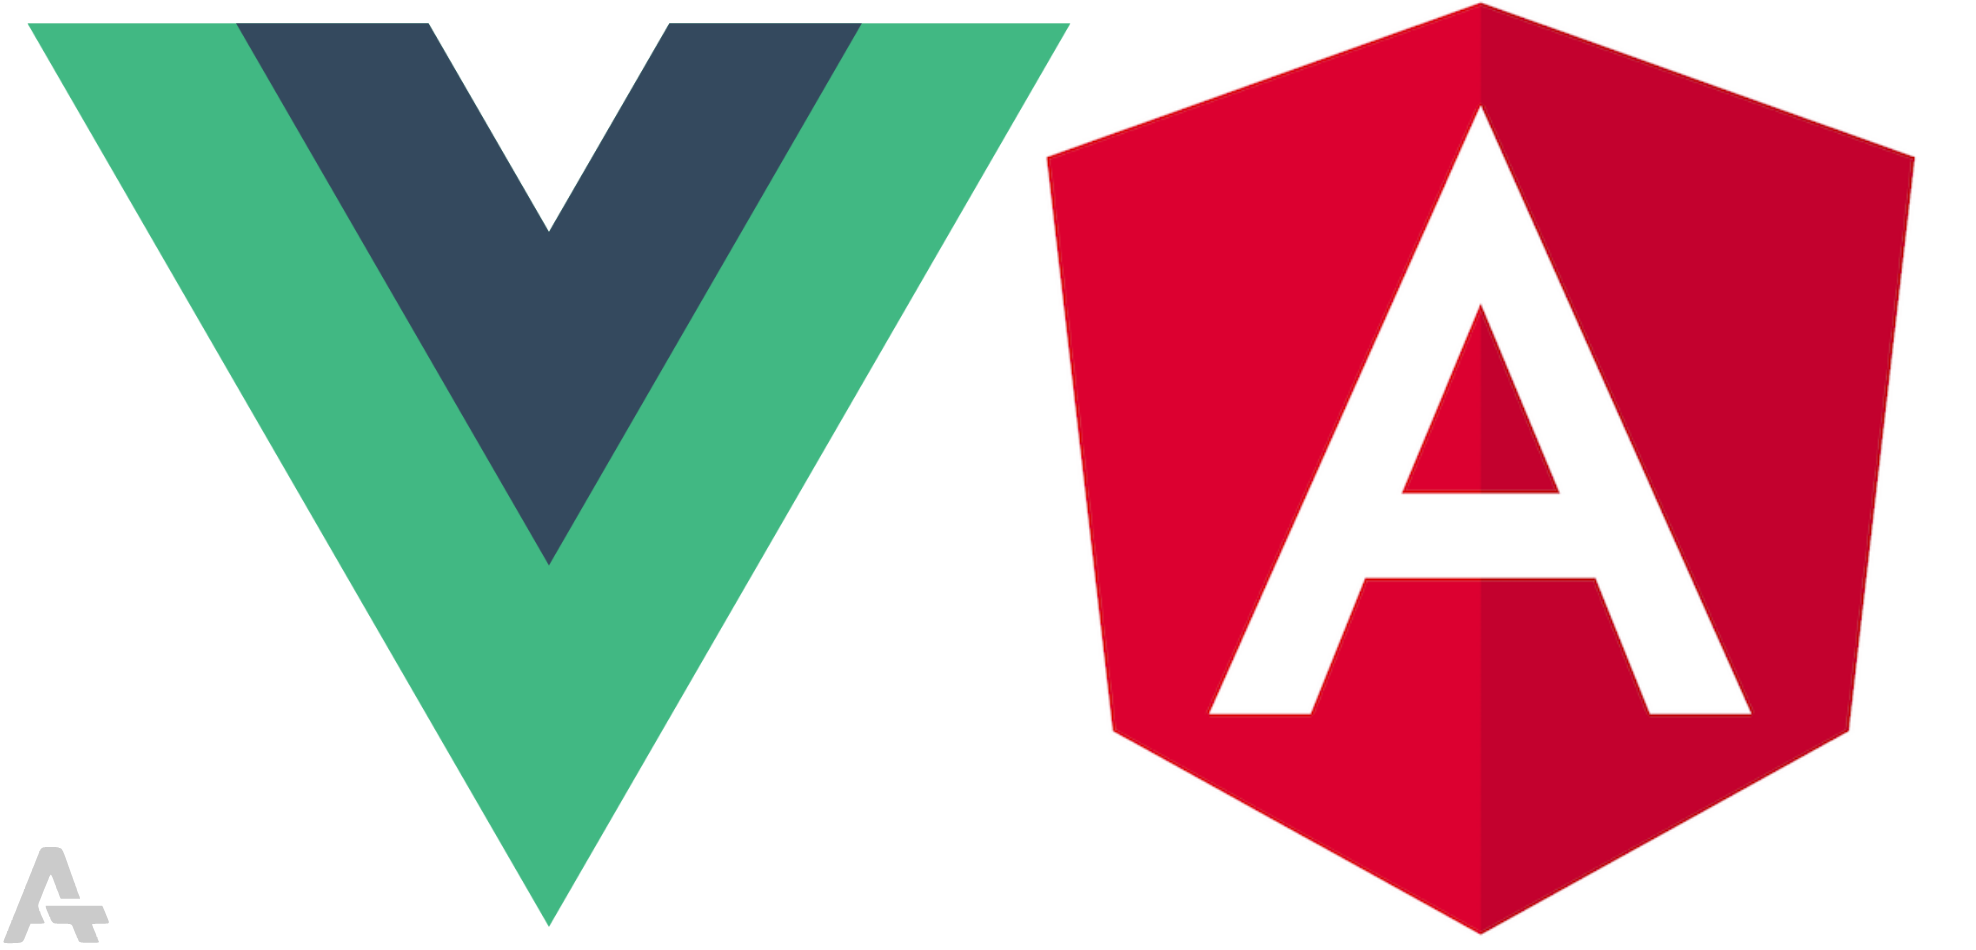 Angular vs Vue: Which is better?